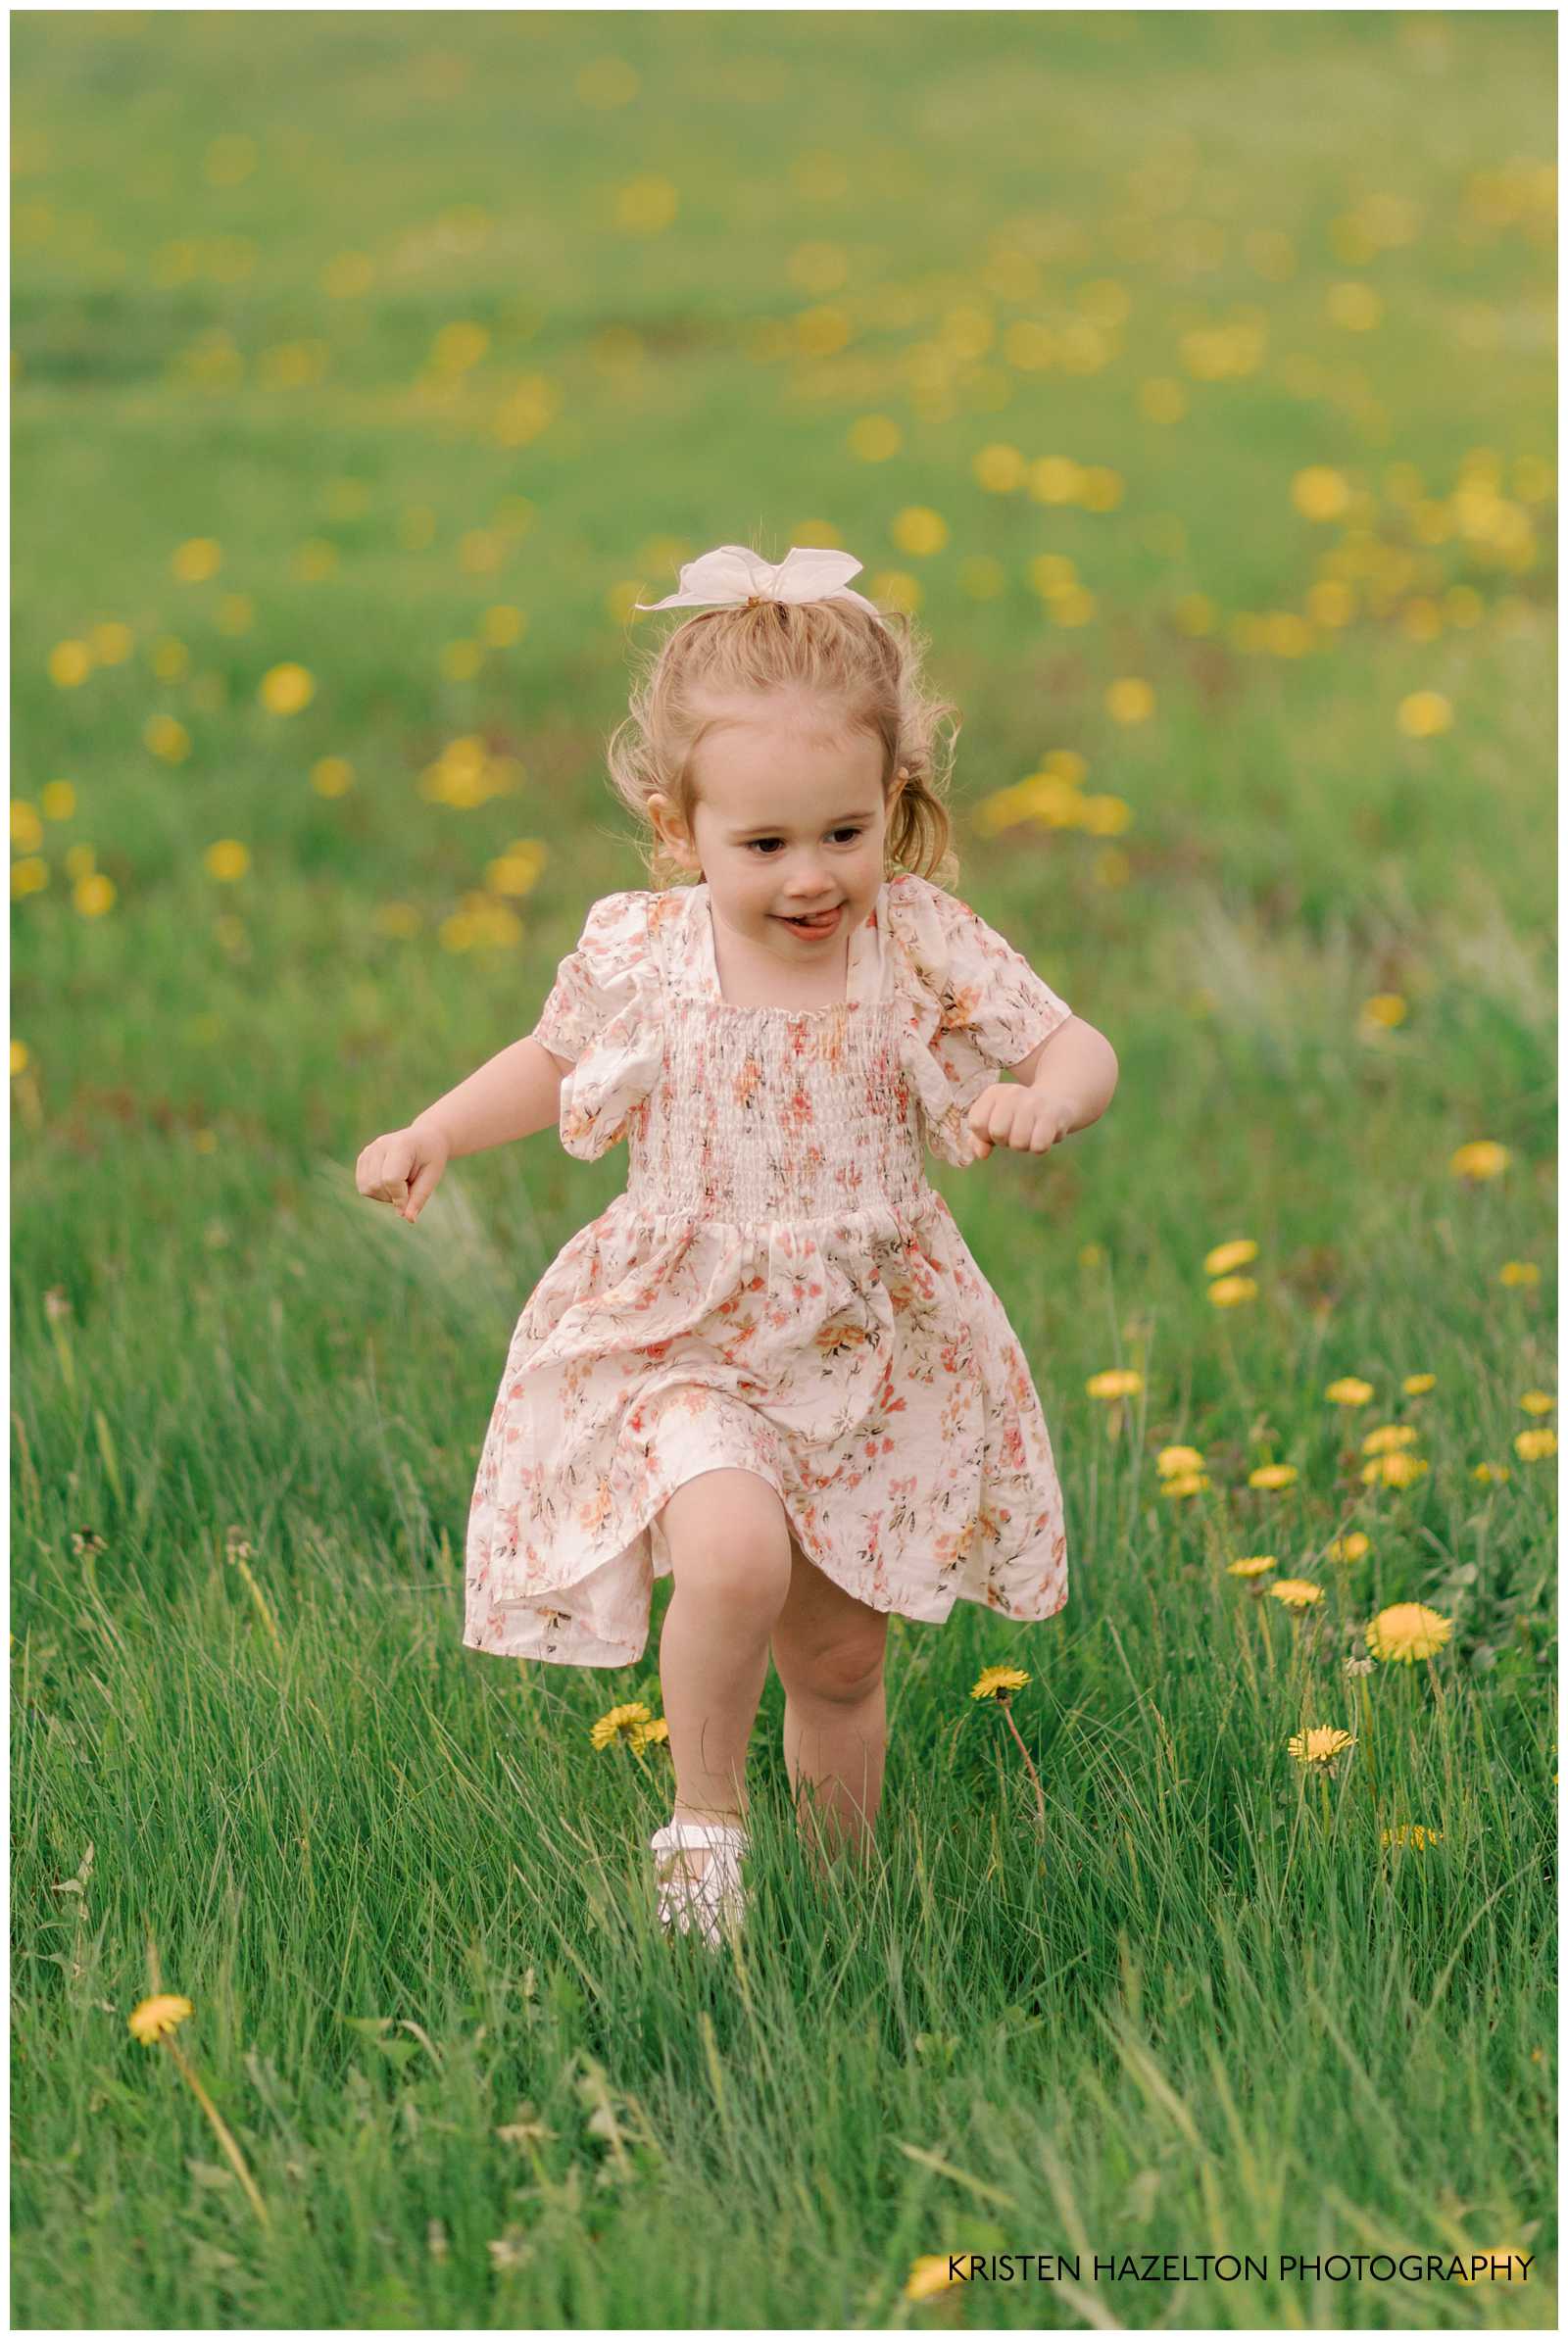 Little girl in pink floral dress running across a green field with yellow dandelions